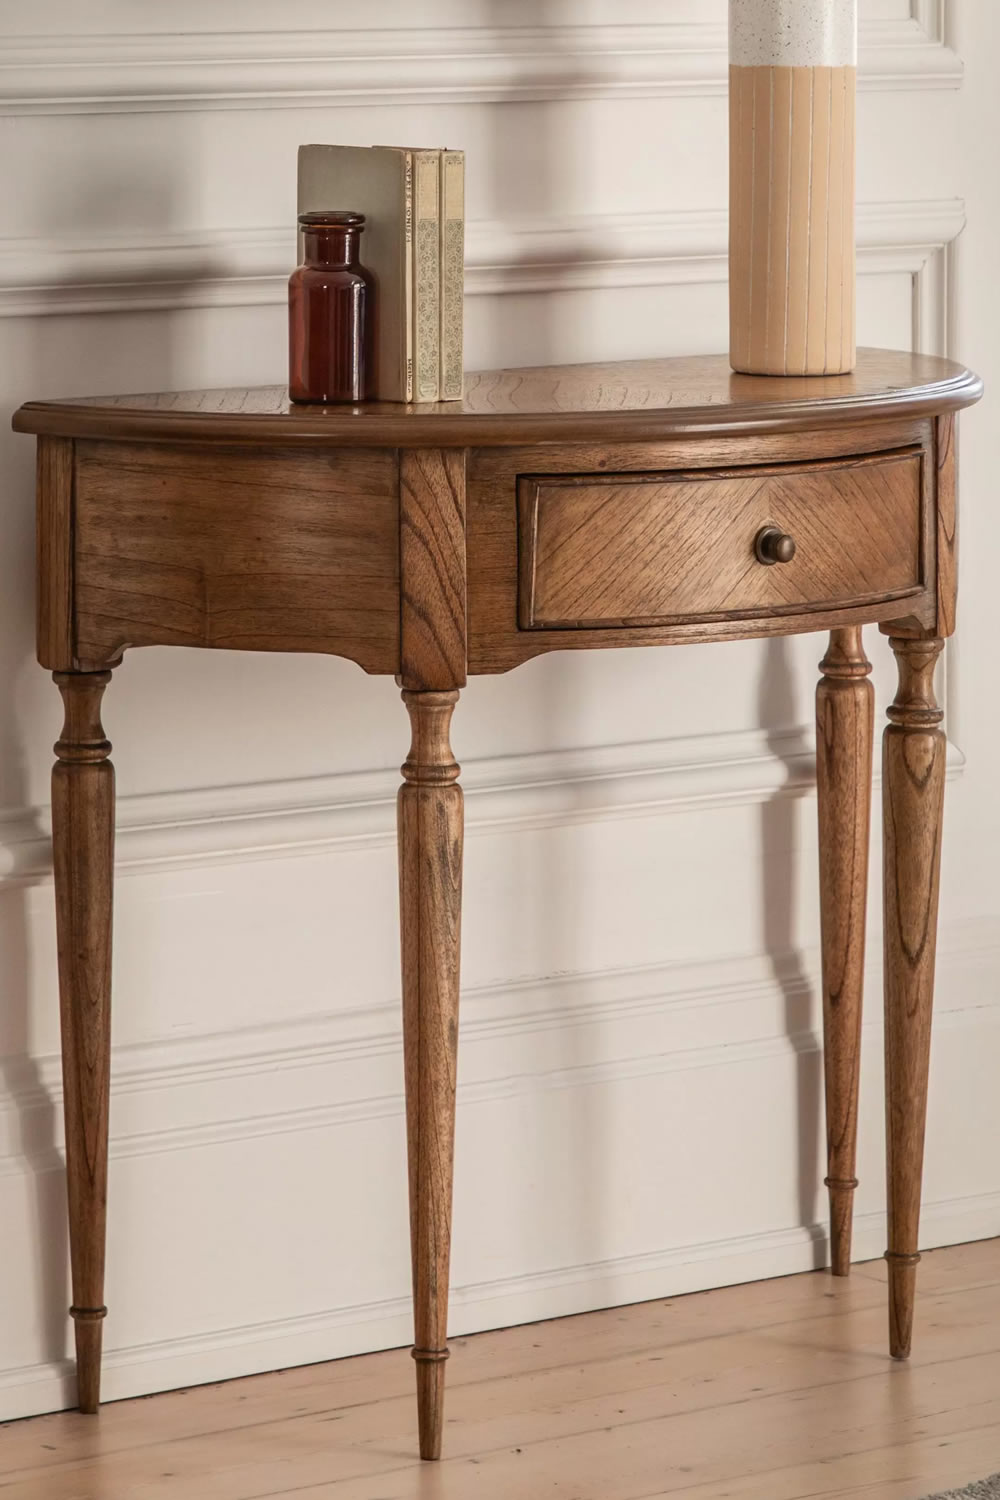 View Highgrove Demi Lune Half Moon Console Table With 1 Large Storage Drawer Rich Brown Mindi Wood With Marquetry Design Ideal For Any Living Space information